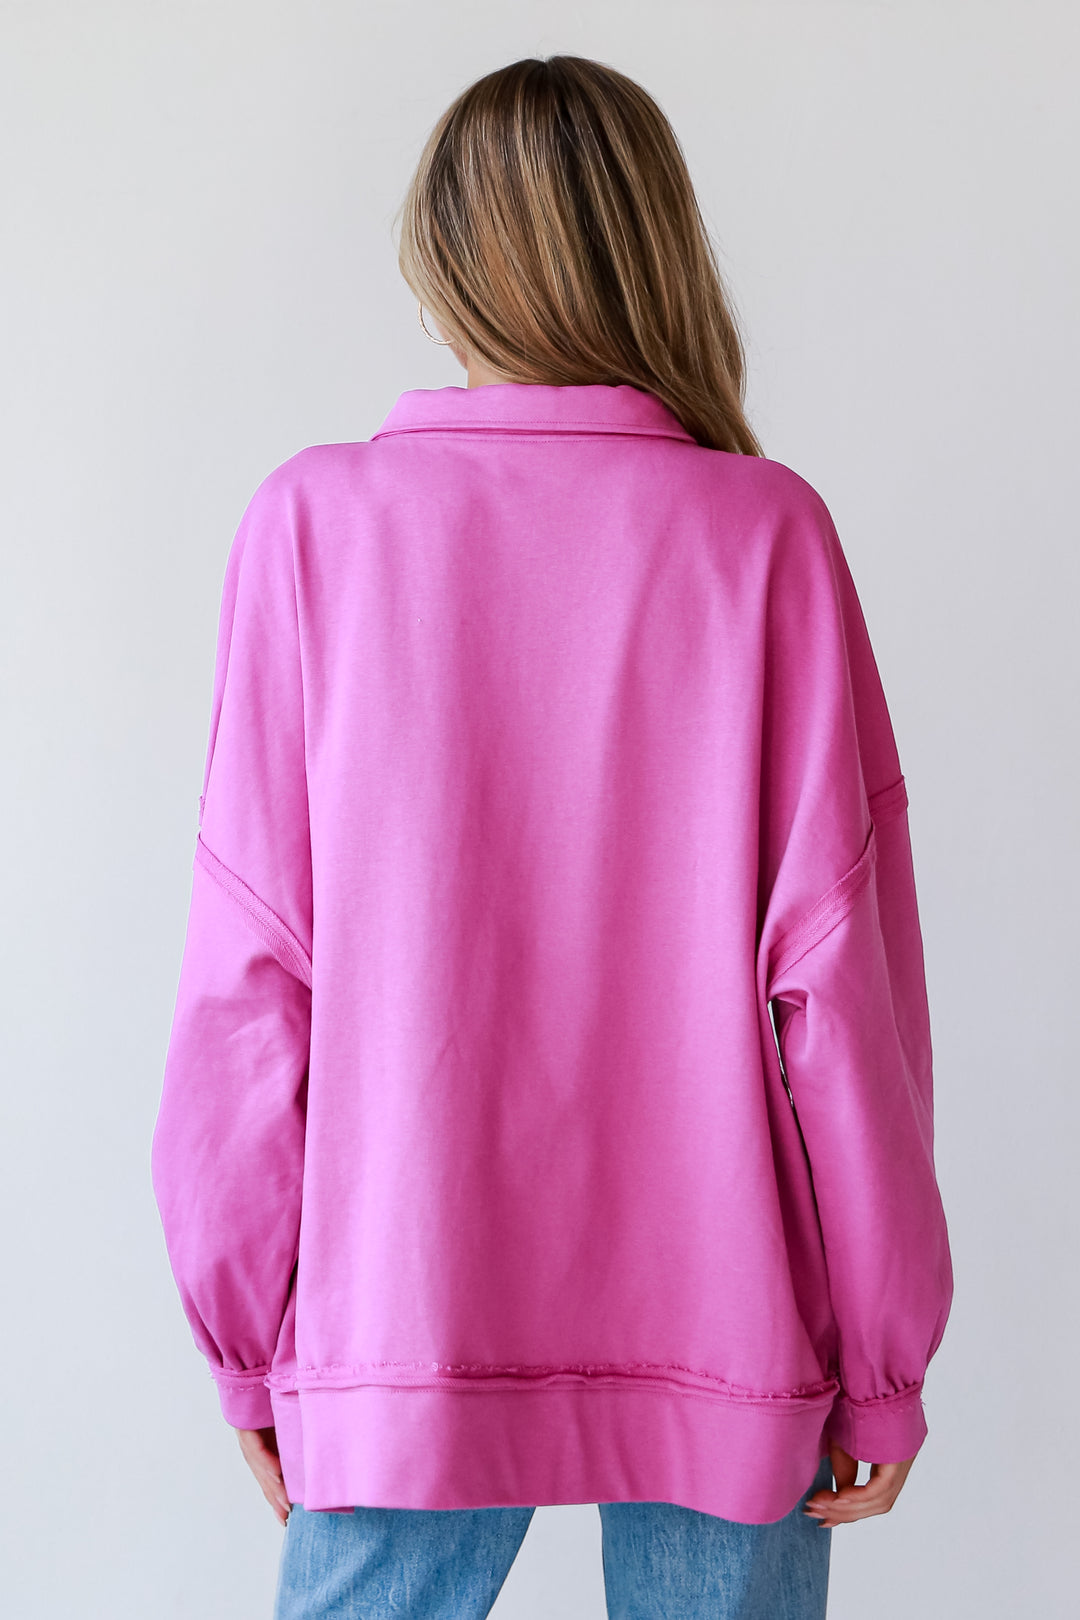 Magenta Oversized Pullover back view